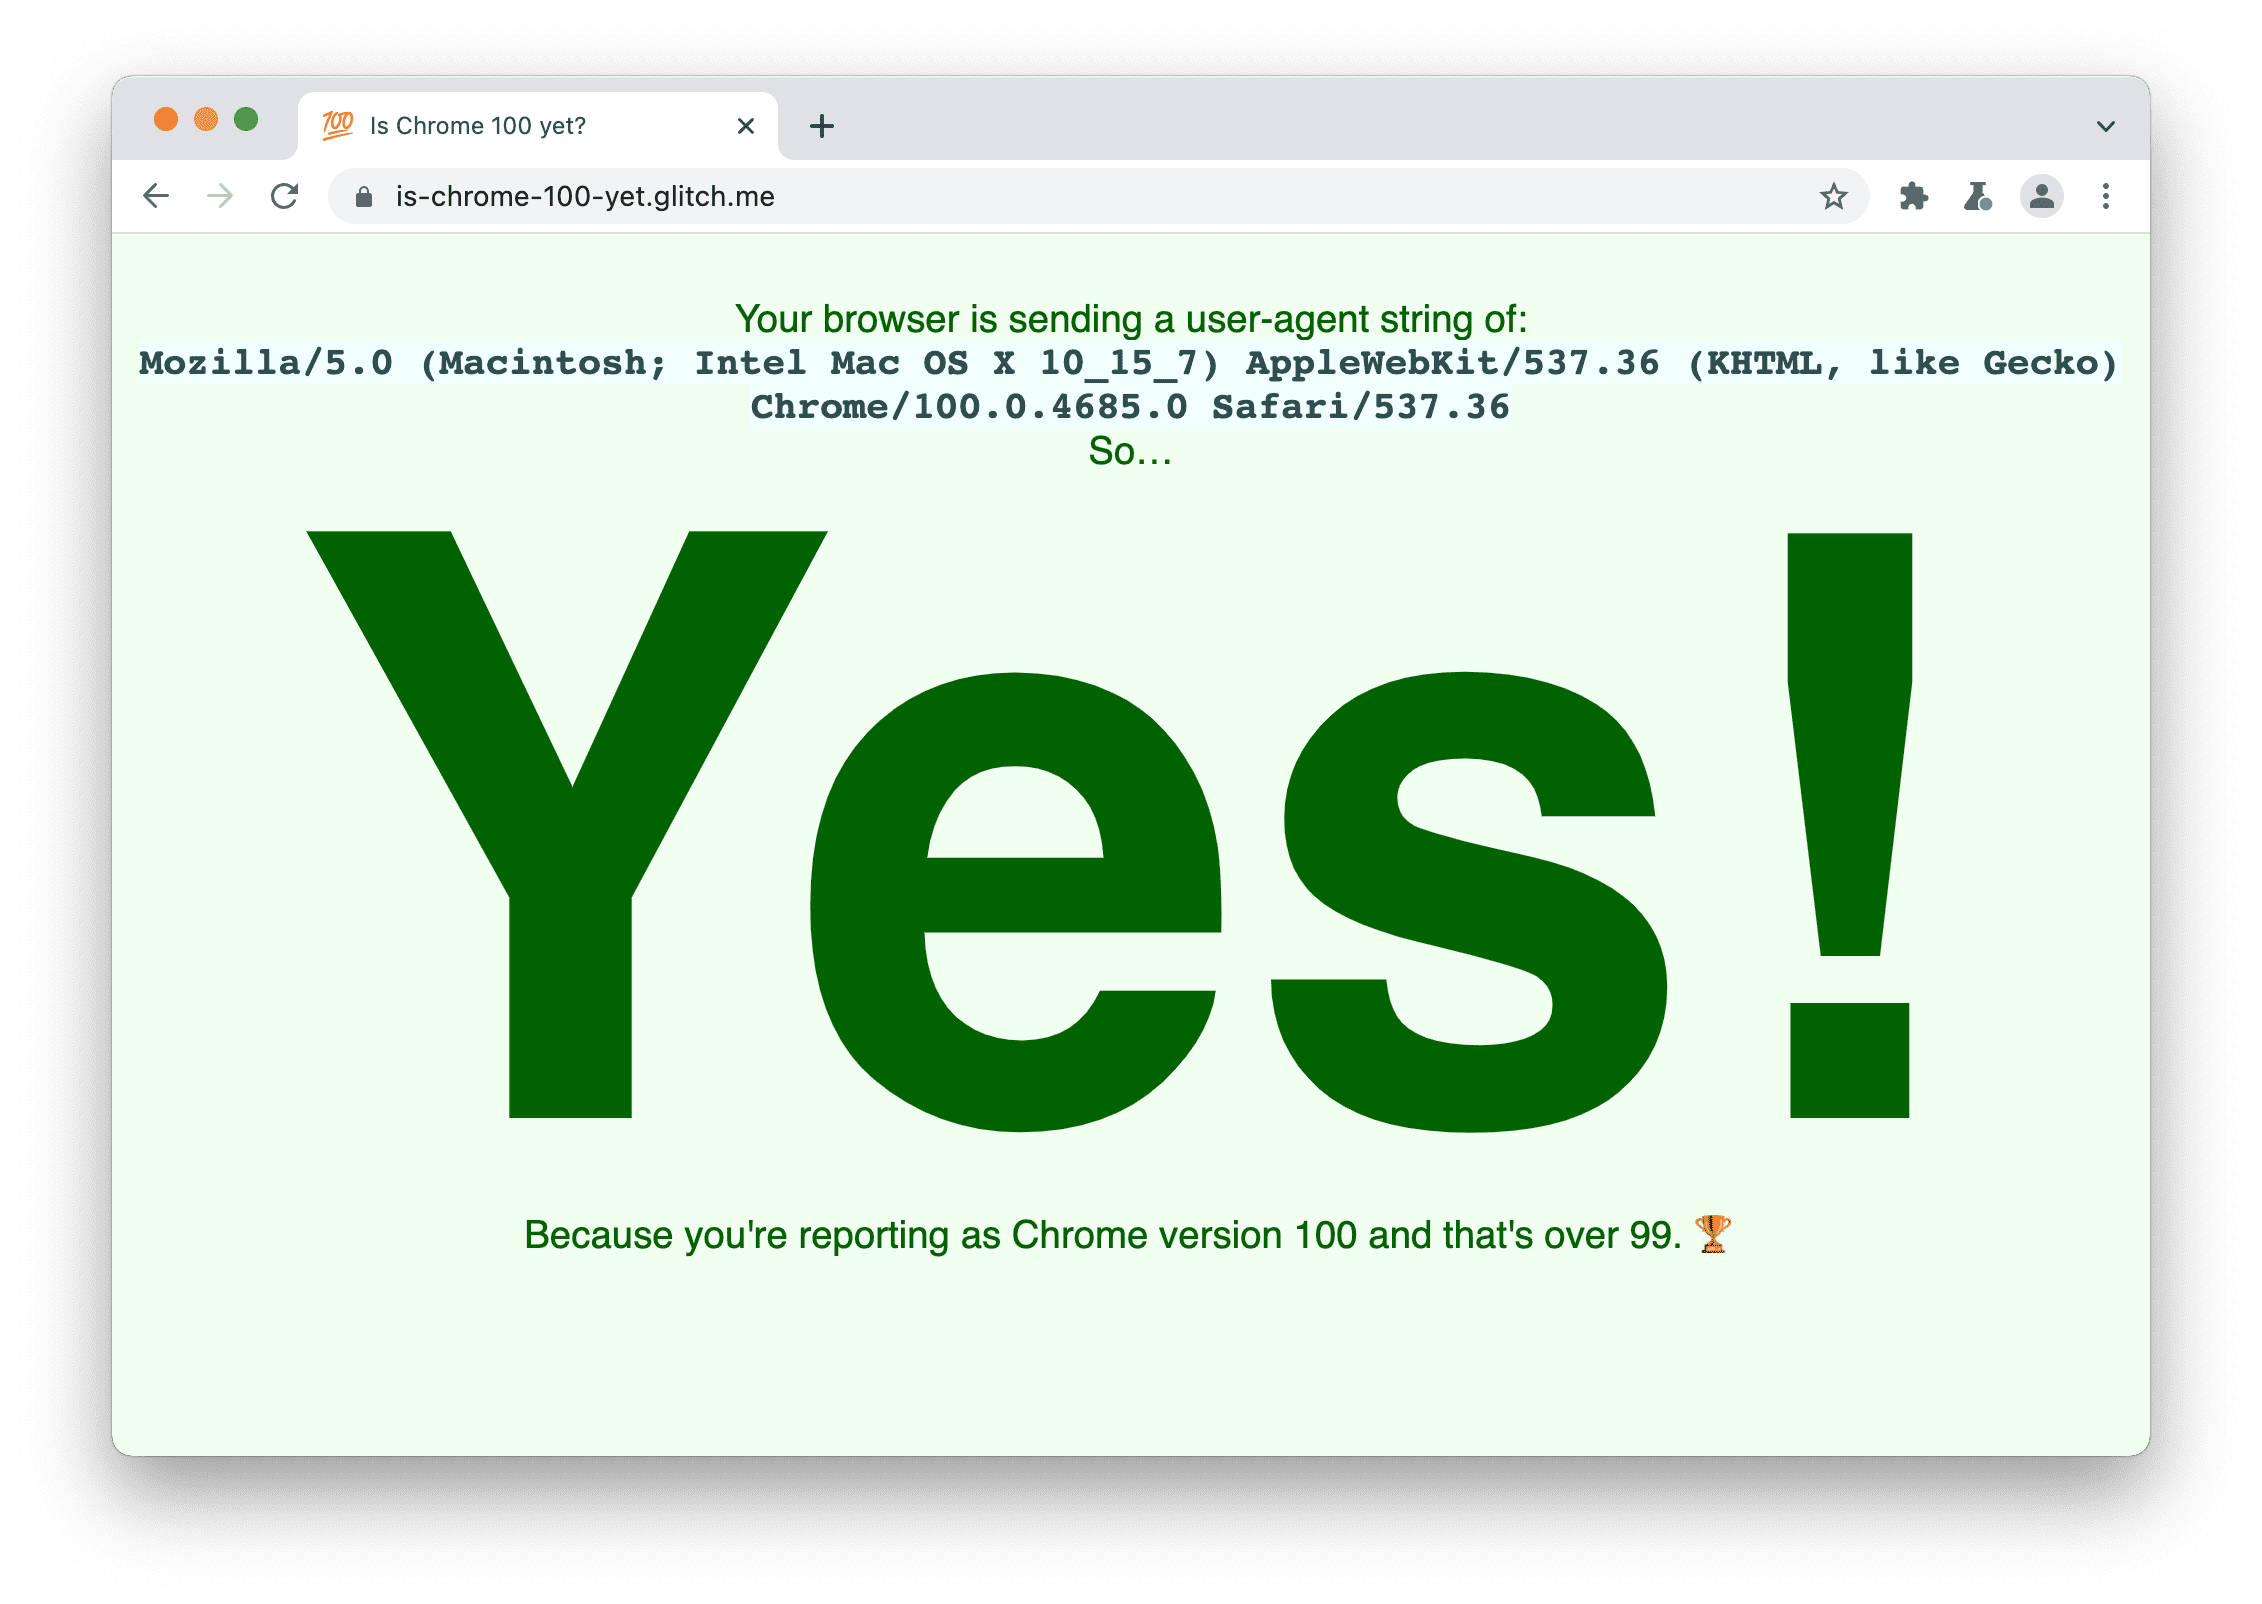 A site that checks if the browser is sending User-
Agent string 100. It displays: Yes, because you're reporting as Chrome version 100 and that's over 99.